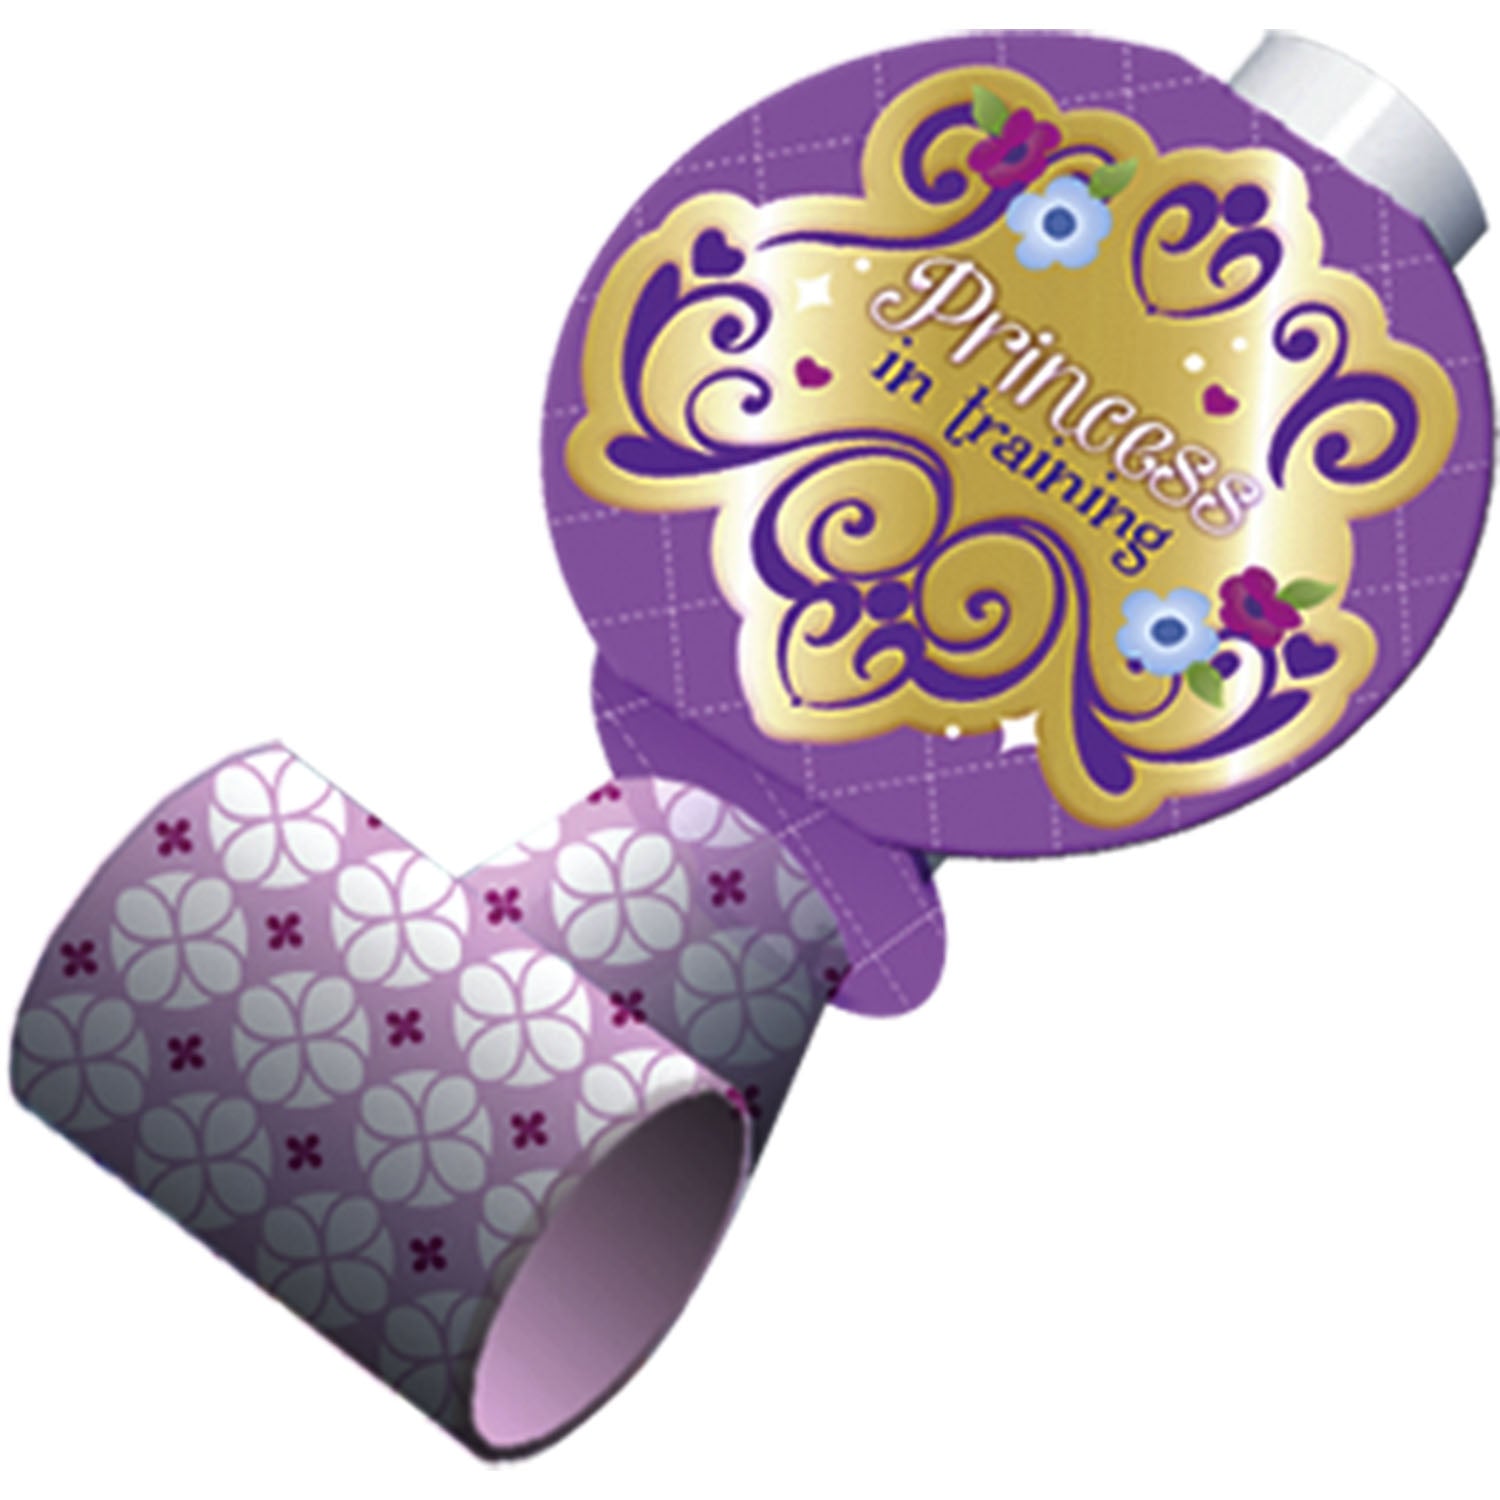 Sofia the First Party Supplies - Birthday Blowouts